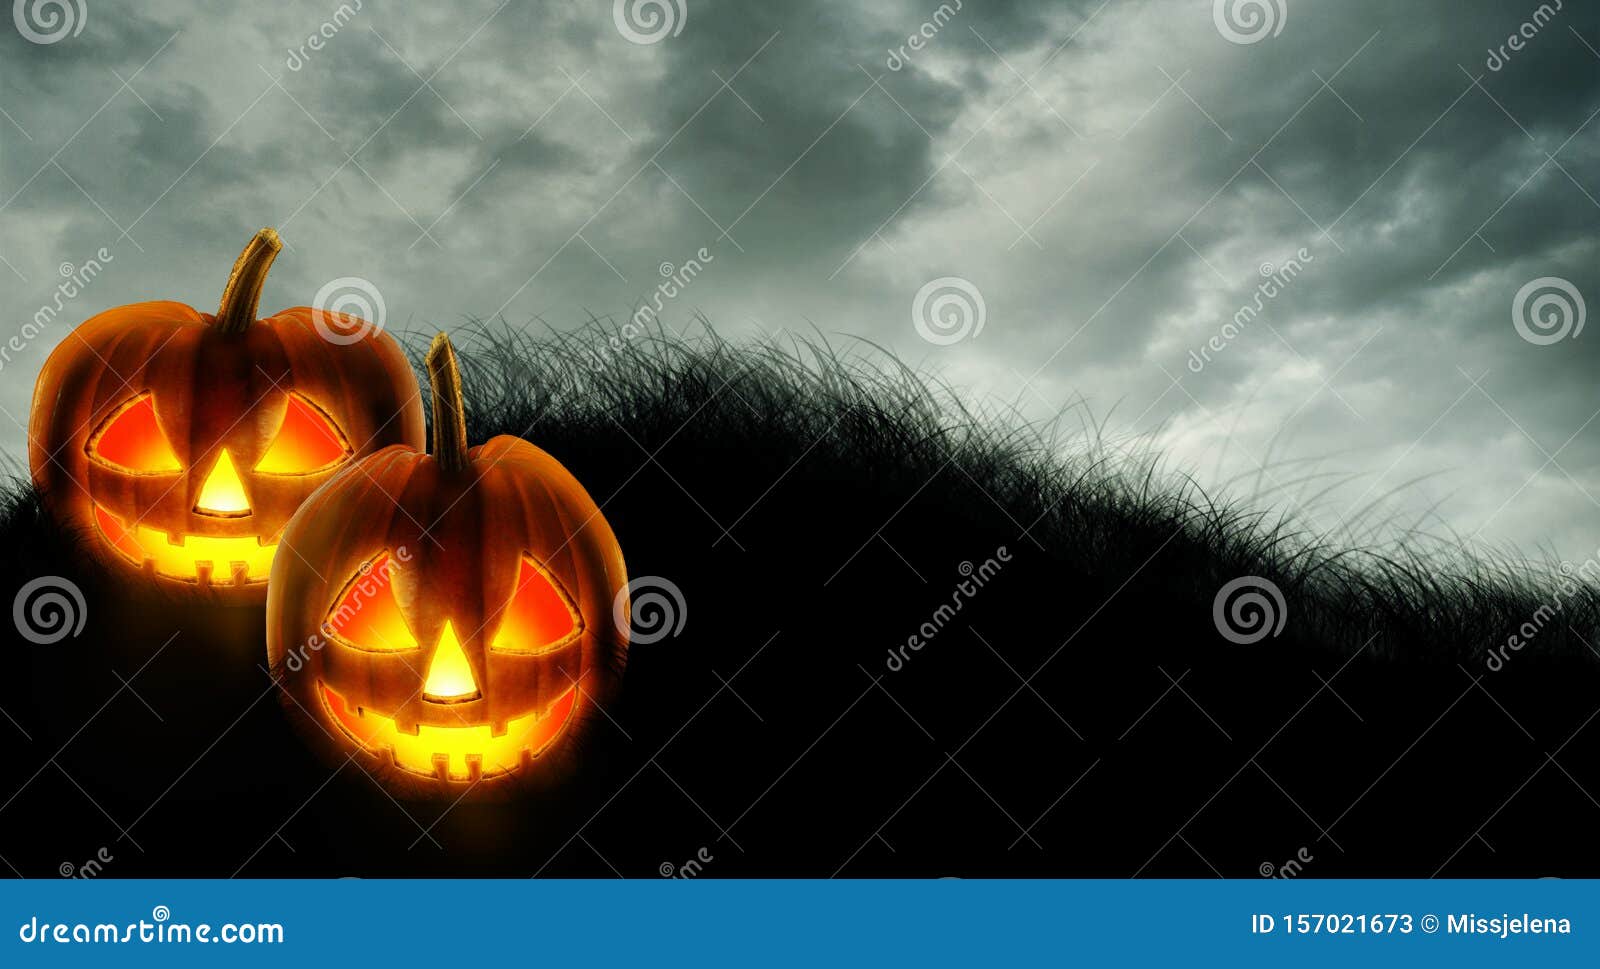 Premium AI Image  happy Halloween pumpkin wallpaper with scary face on  fantastic background